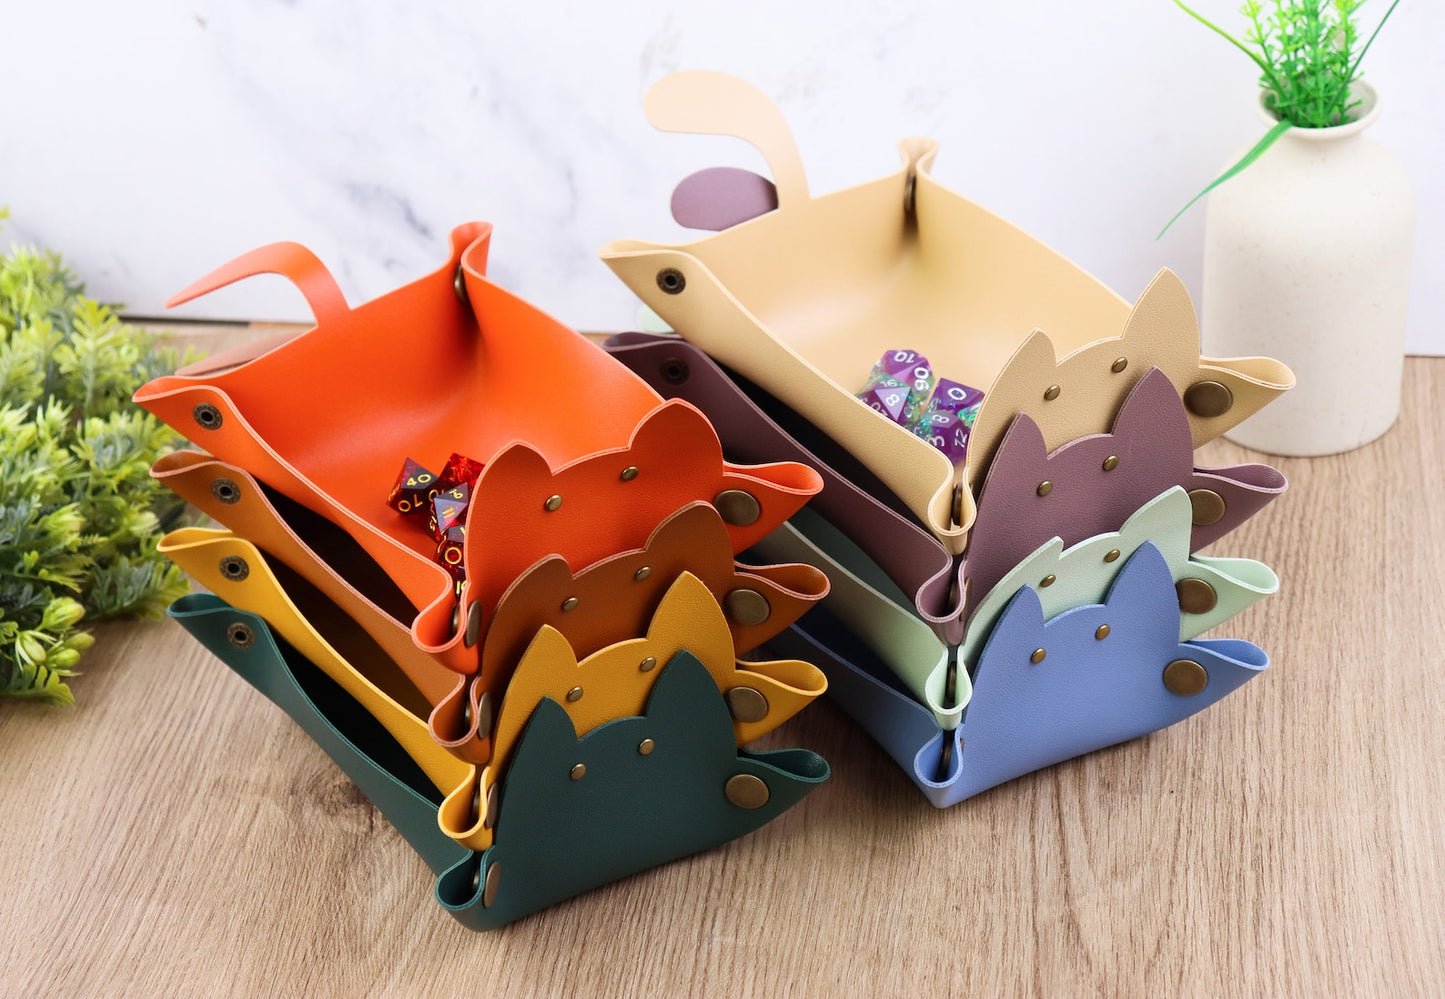 FREE Today: Soft Leather Dice Tray (Random Color)